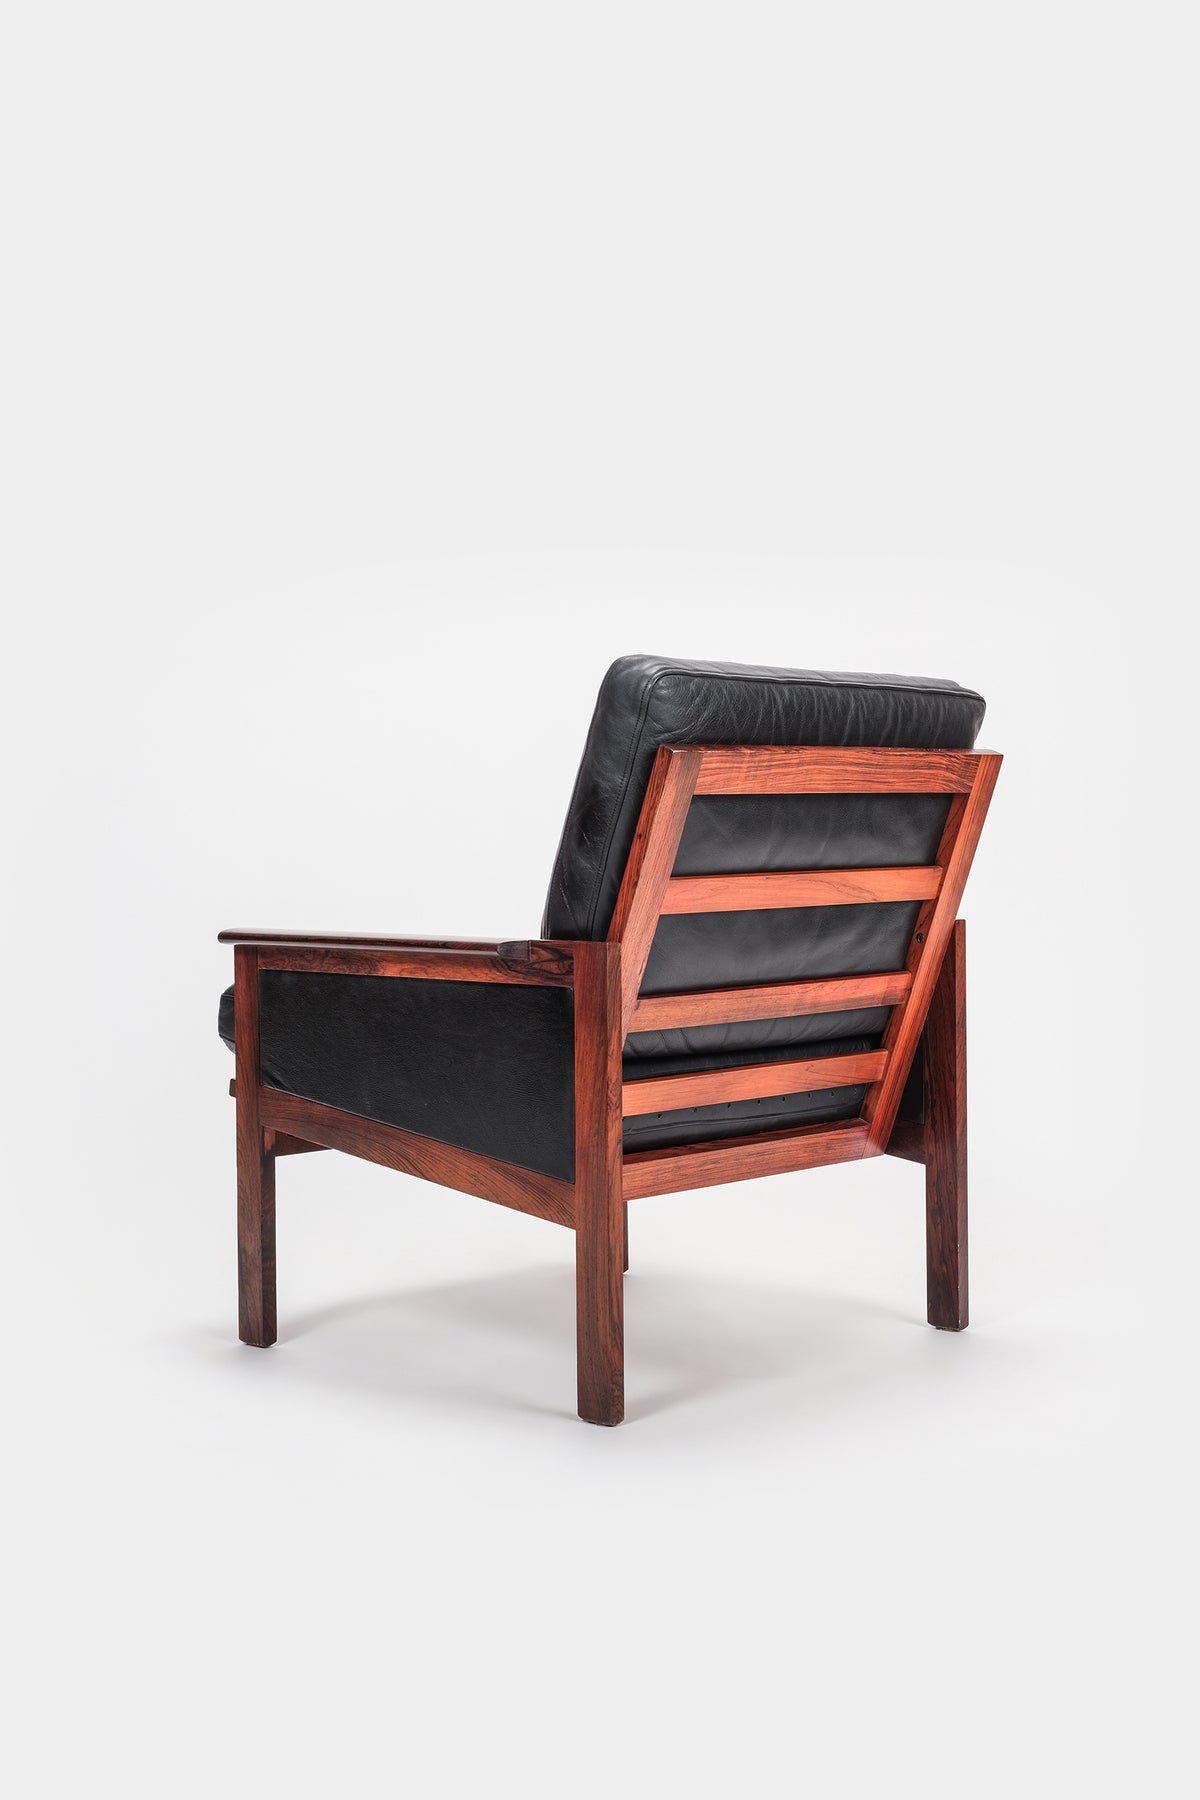 Illum Wikelsoe Capella Armchair, Rosewood and Leather, 60s